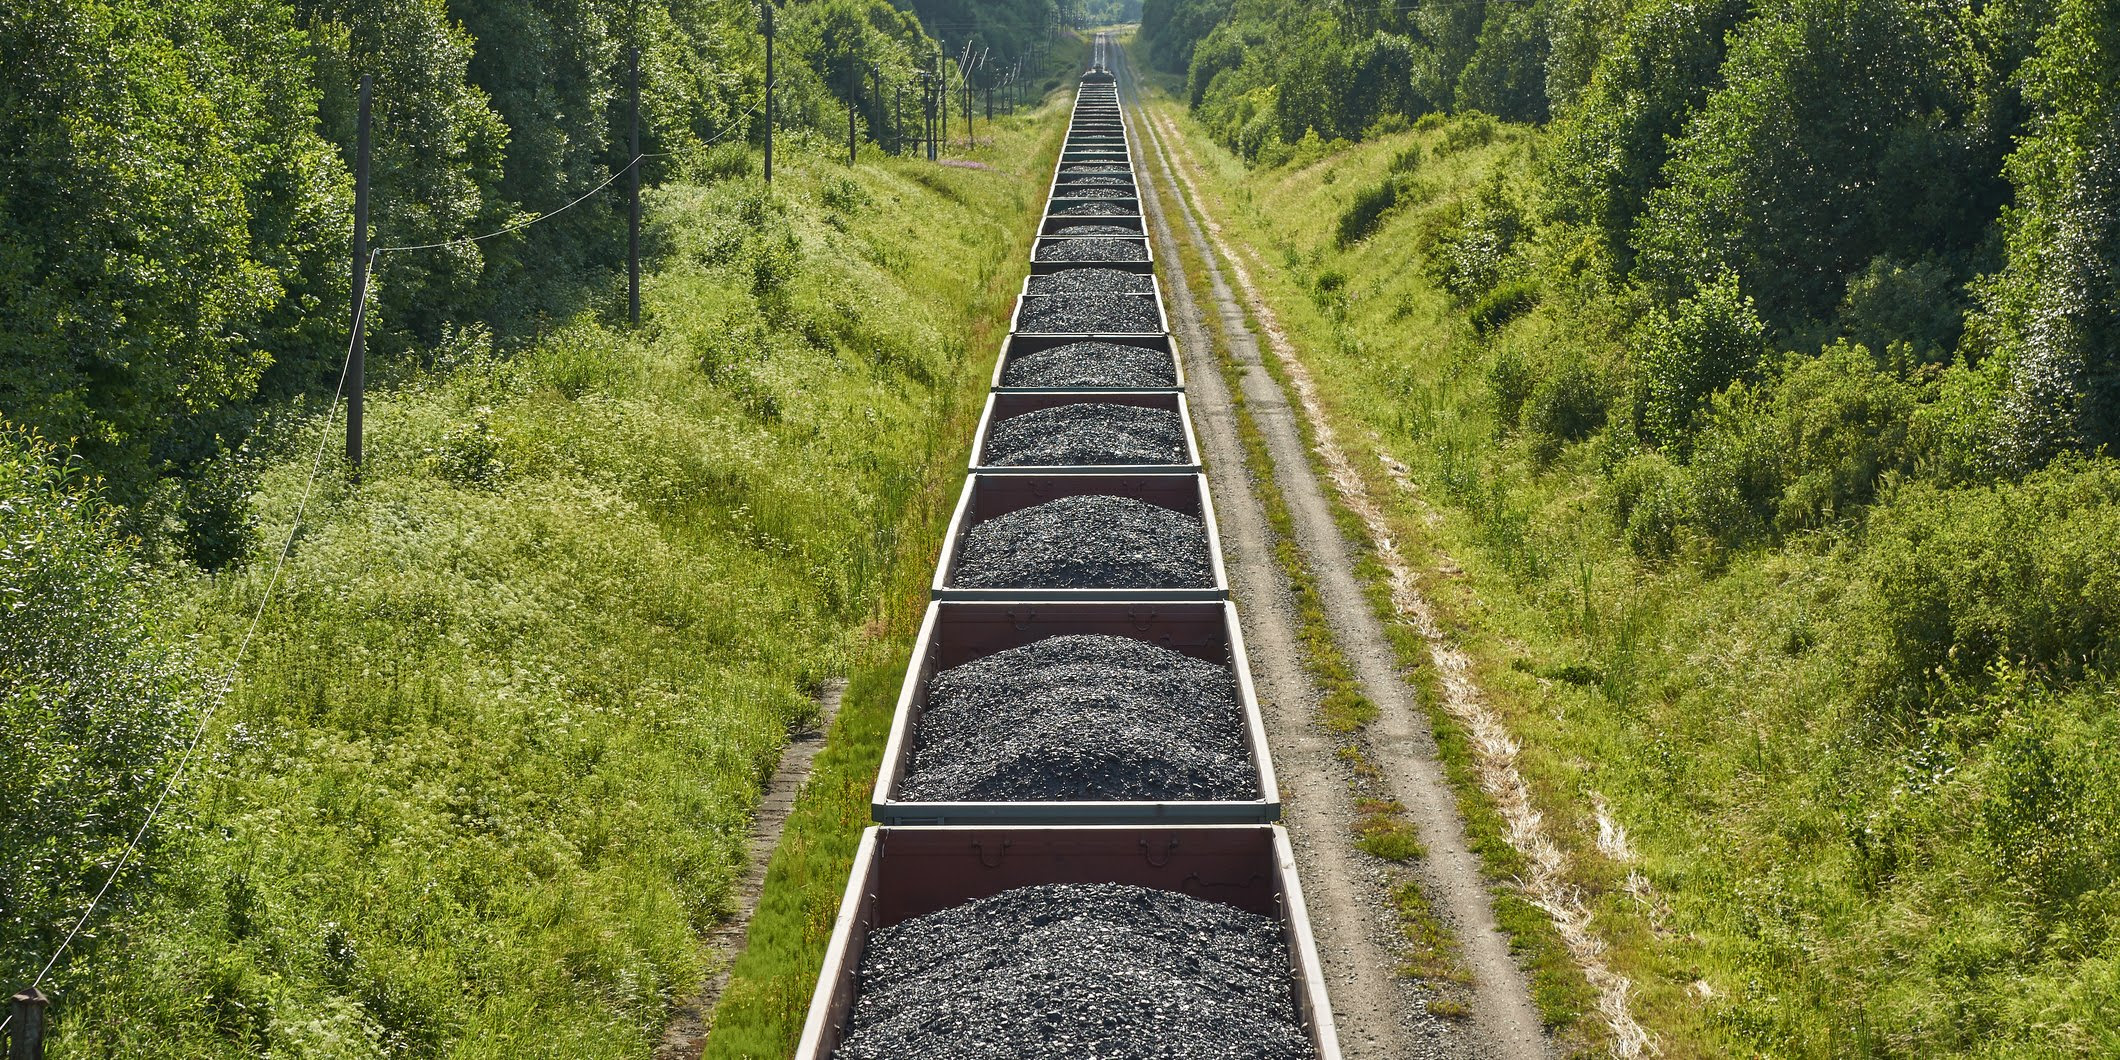 A train filled with dark coal moves through a beautiful green landscape